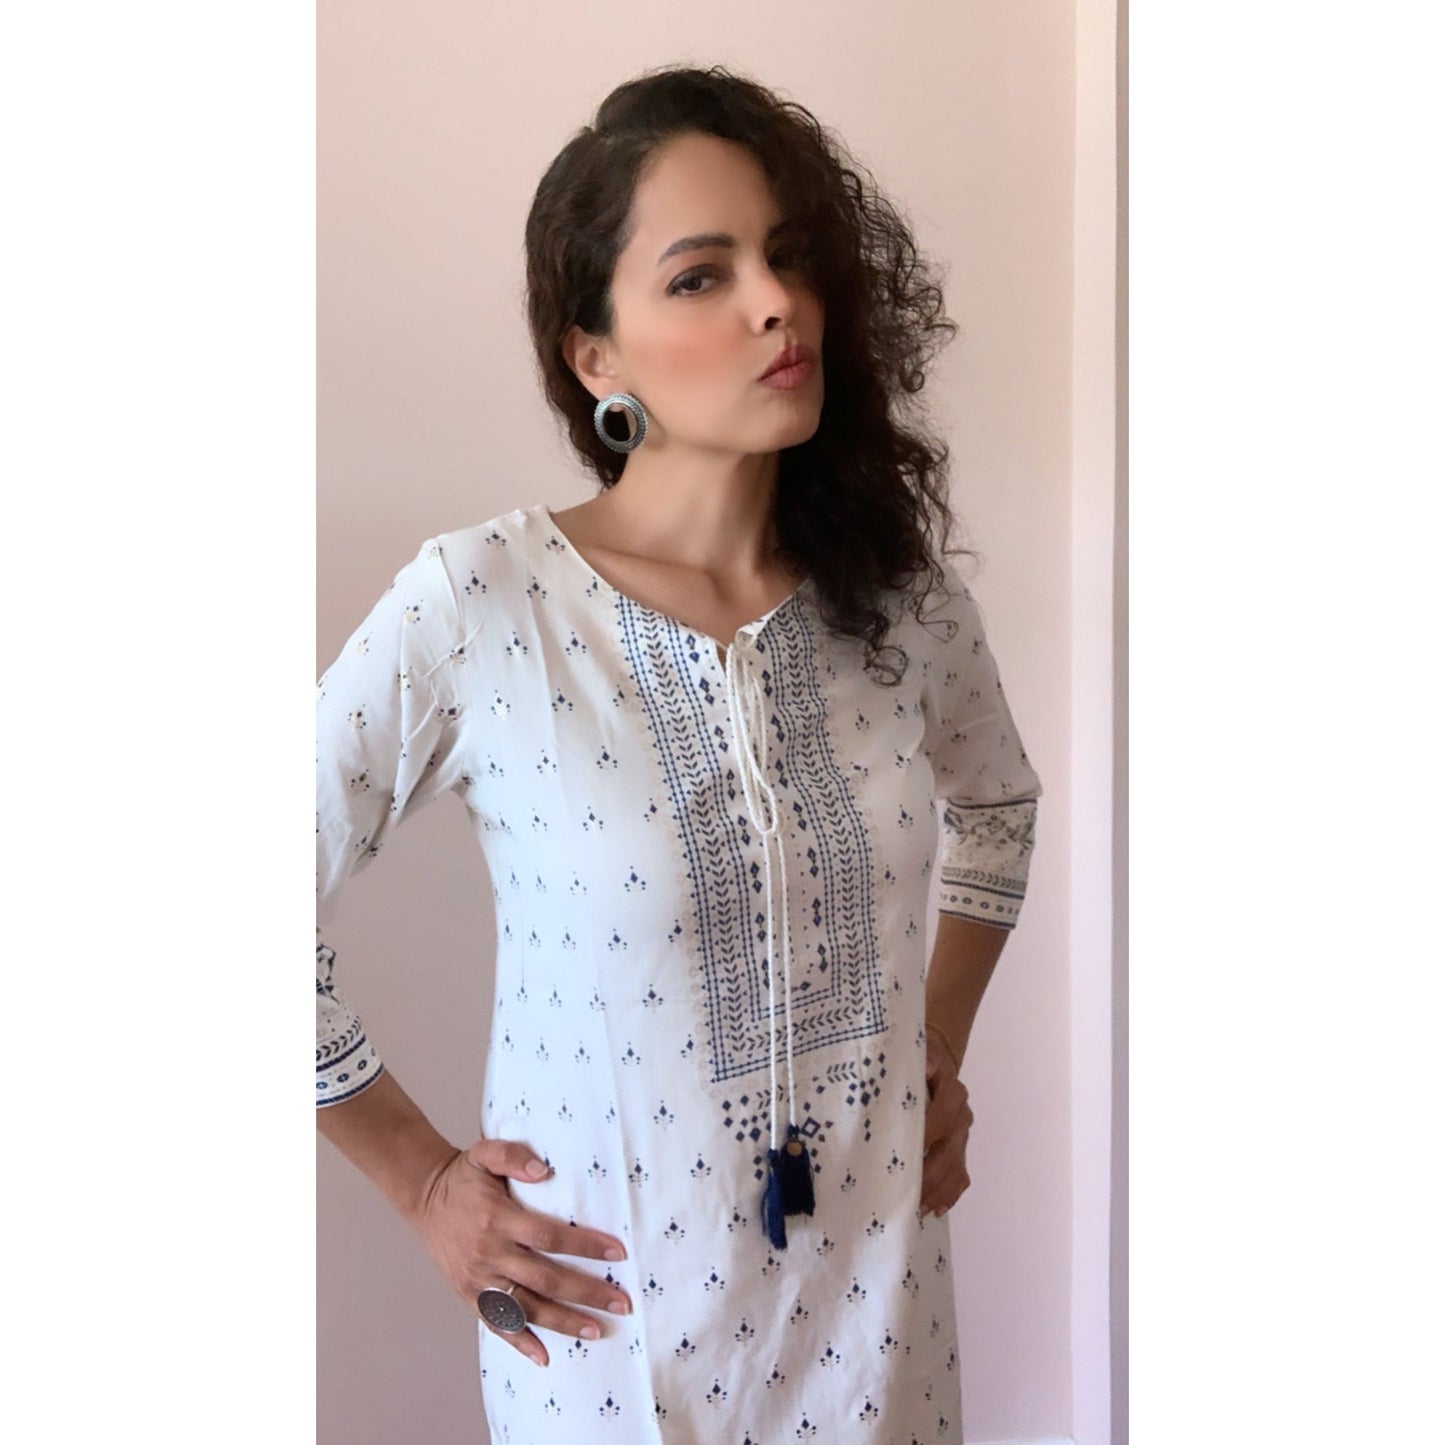 Soft and silky white kurta with blue prints all over. Casual everyday wear Kurtas that can be worn on jeans. 3/4th sleeve kurti with dori strings. 